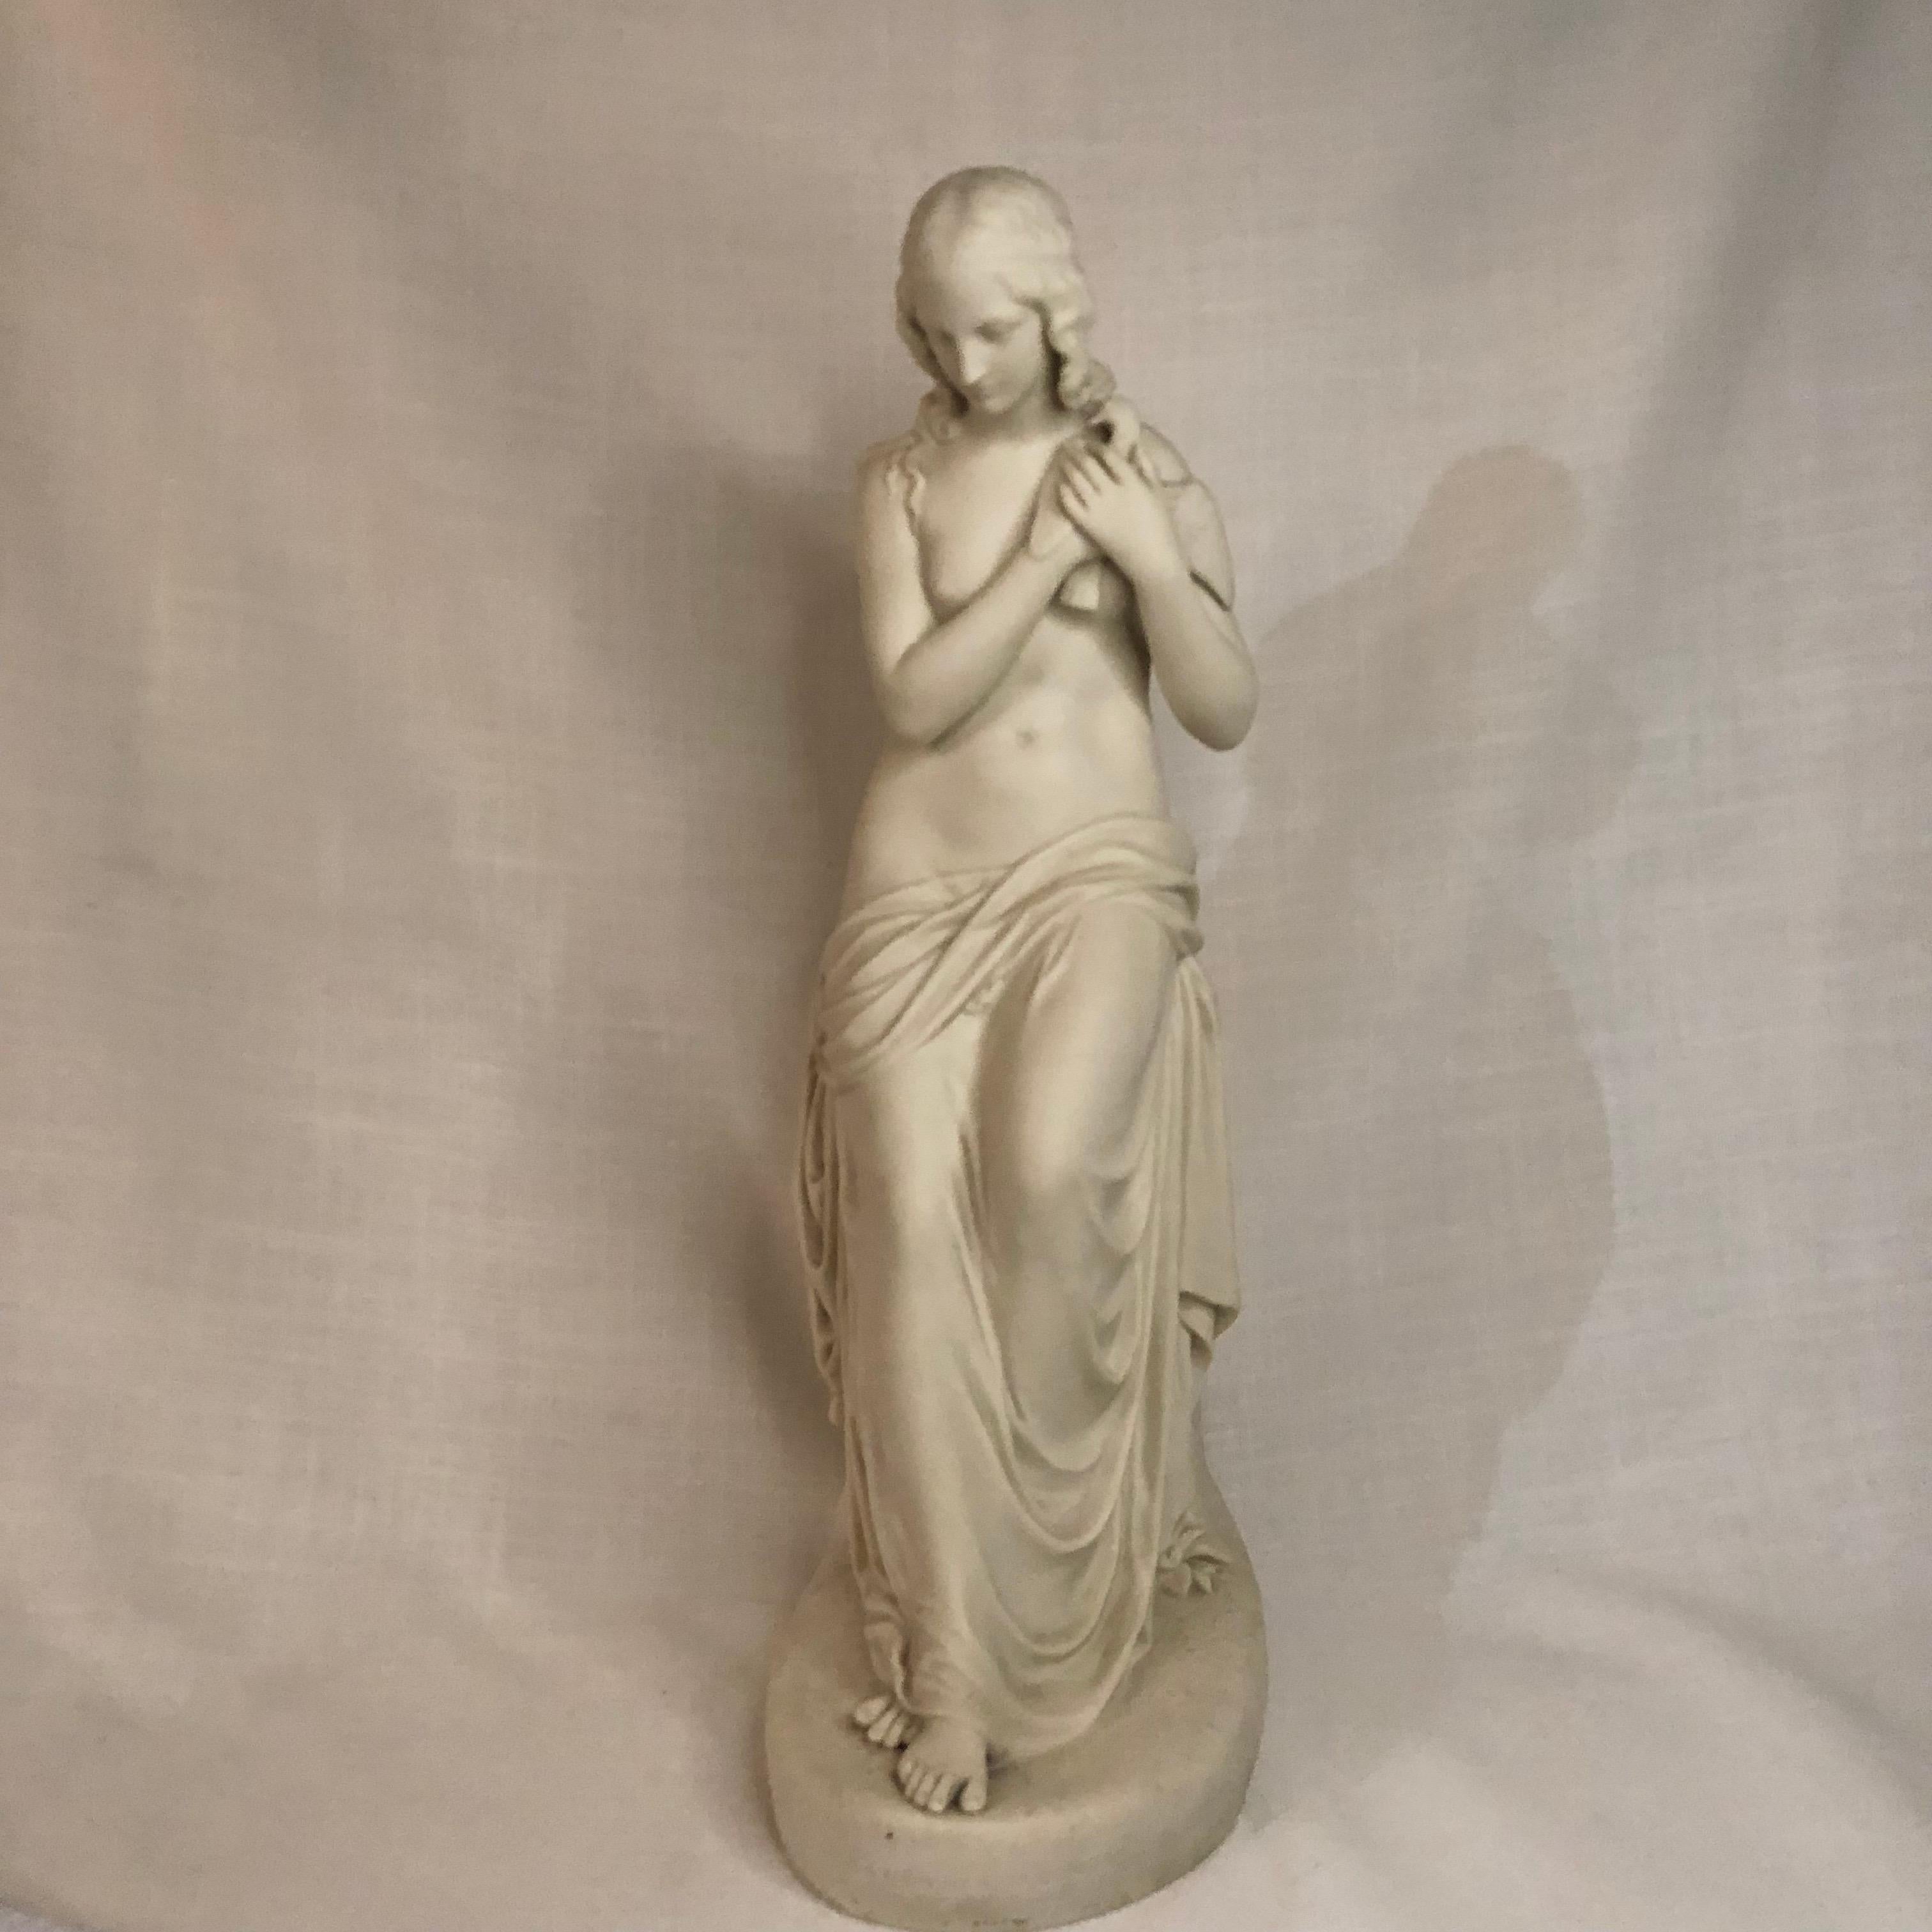 Porcelain Tall Copeland Parian Figure of Exquisite Lady Named Innocence Holding a Bird